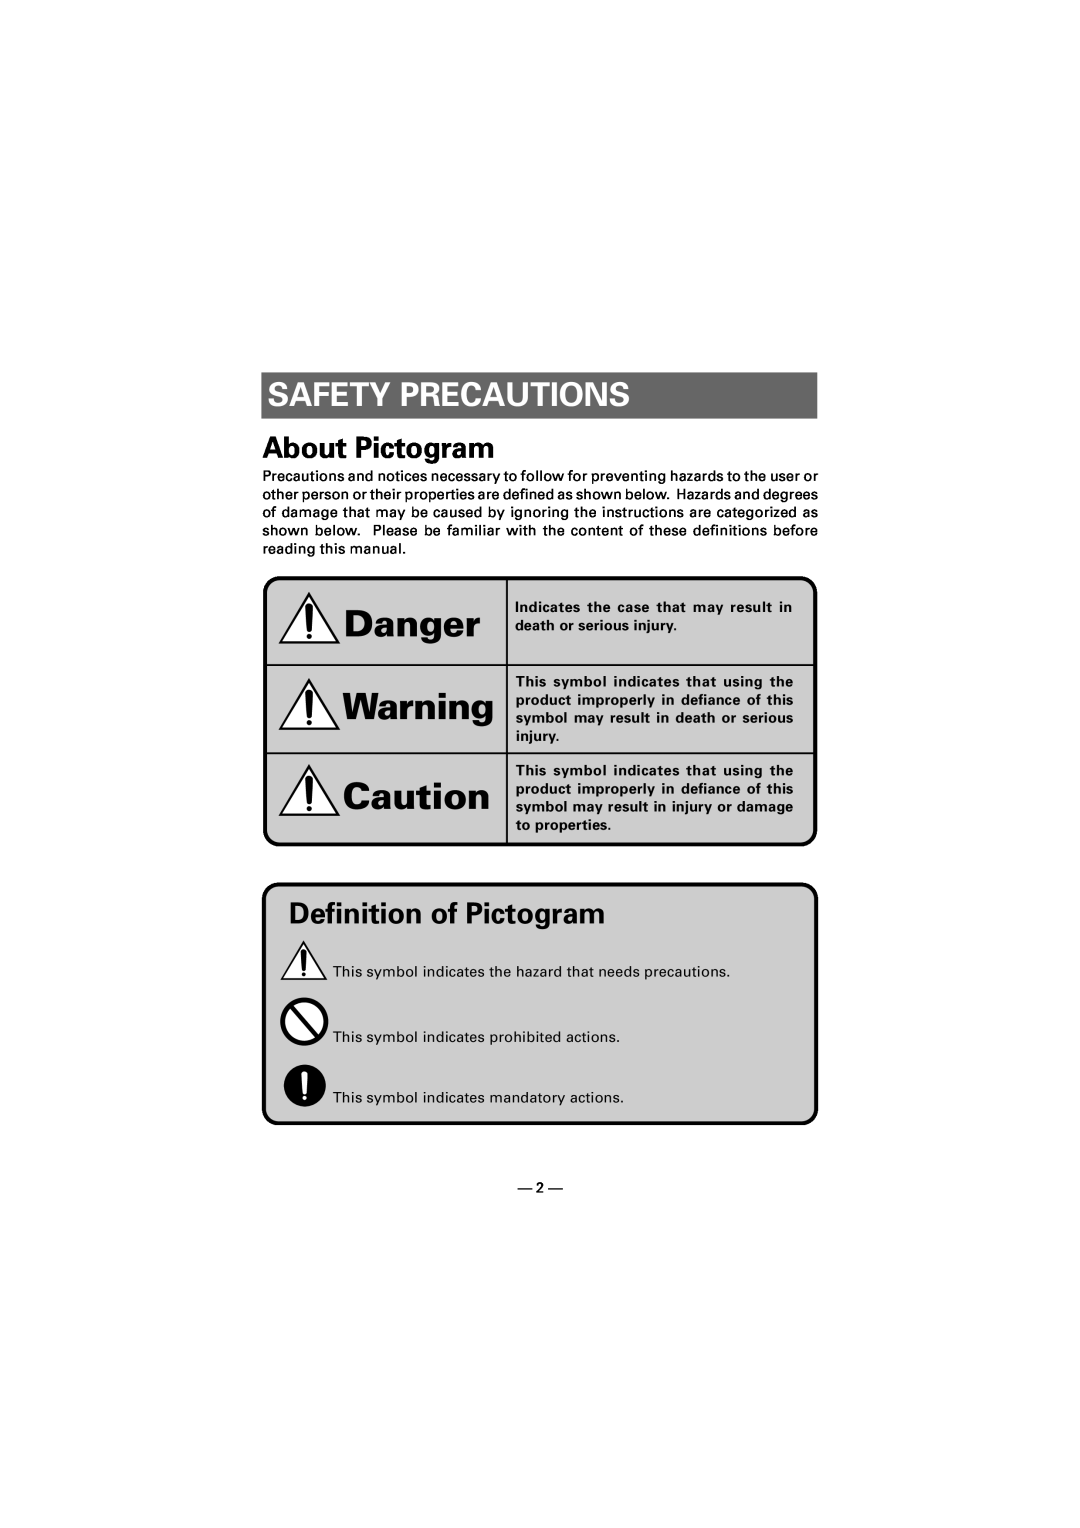 Citizen Systems CMP-10 manual Safety Precautions, About Pictogram, Definition of Pictogram, Danger 